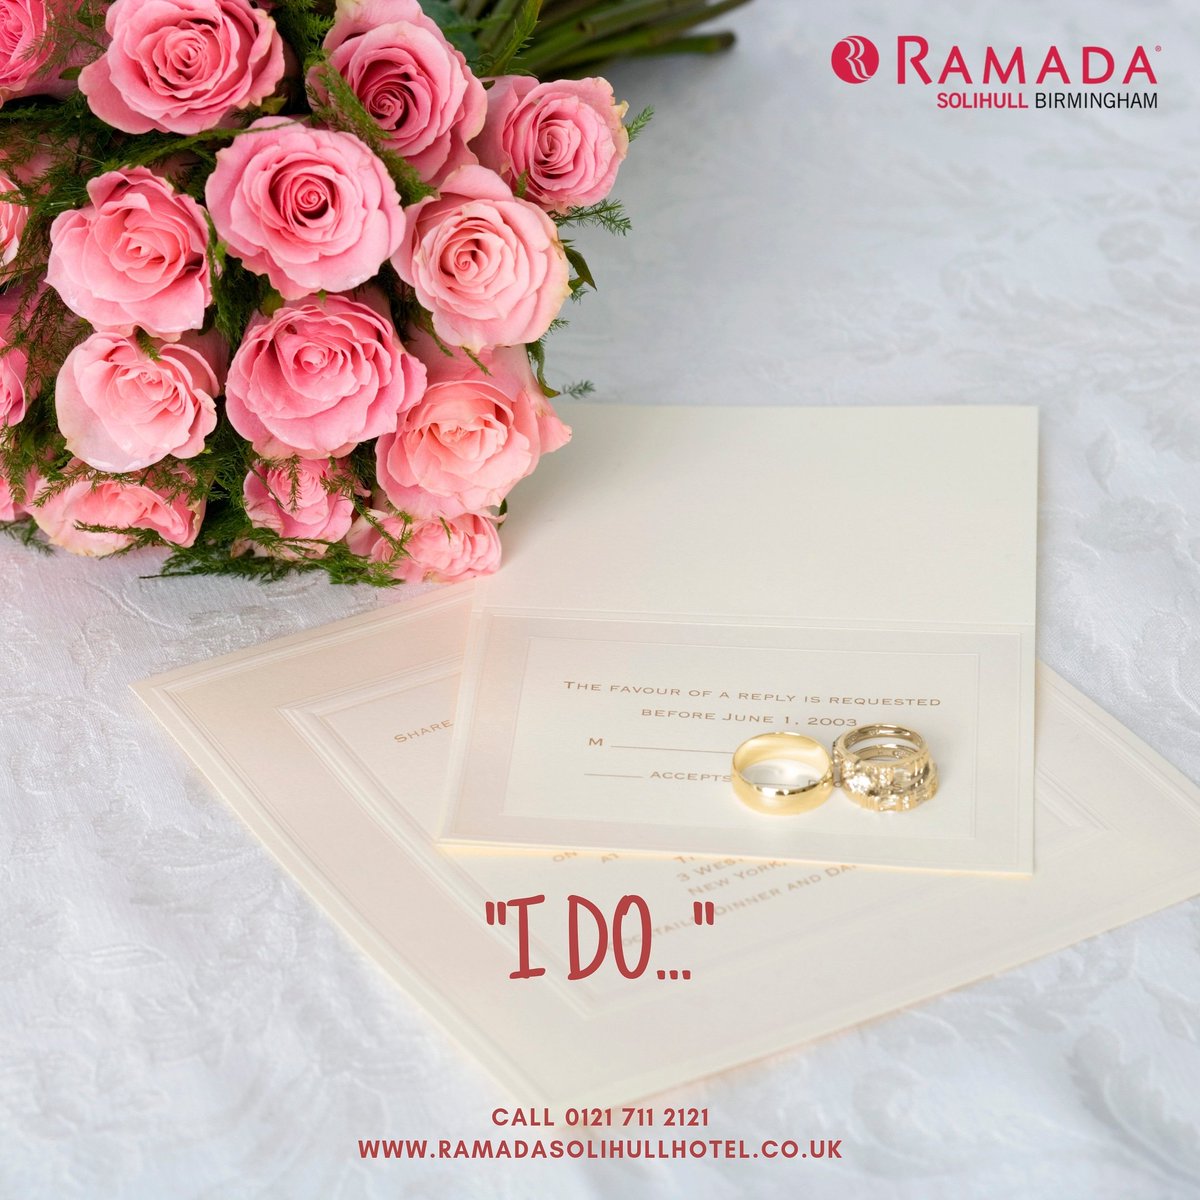 Celebrate your big day amid the romantic Tudor surroundings and make it special @ramadasolihull
For enquiries call: 0121 711 2121
#weddings #birmingham  #solihullweddings #solihullweddingphotographer #birminghamweddingvenue #ramadasolihull #solihull